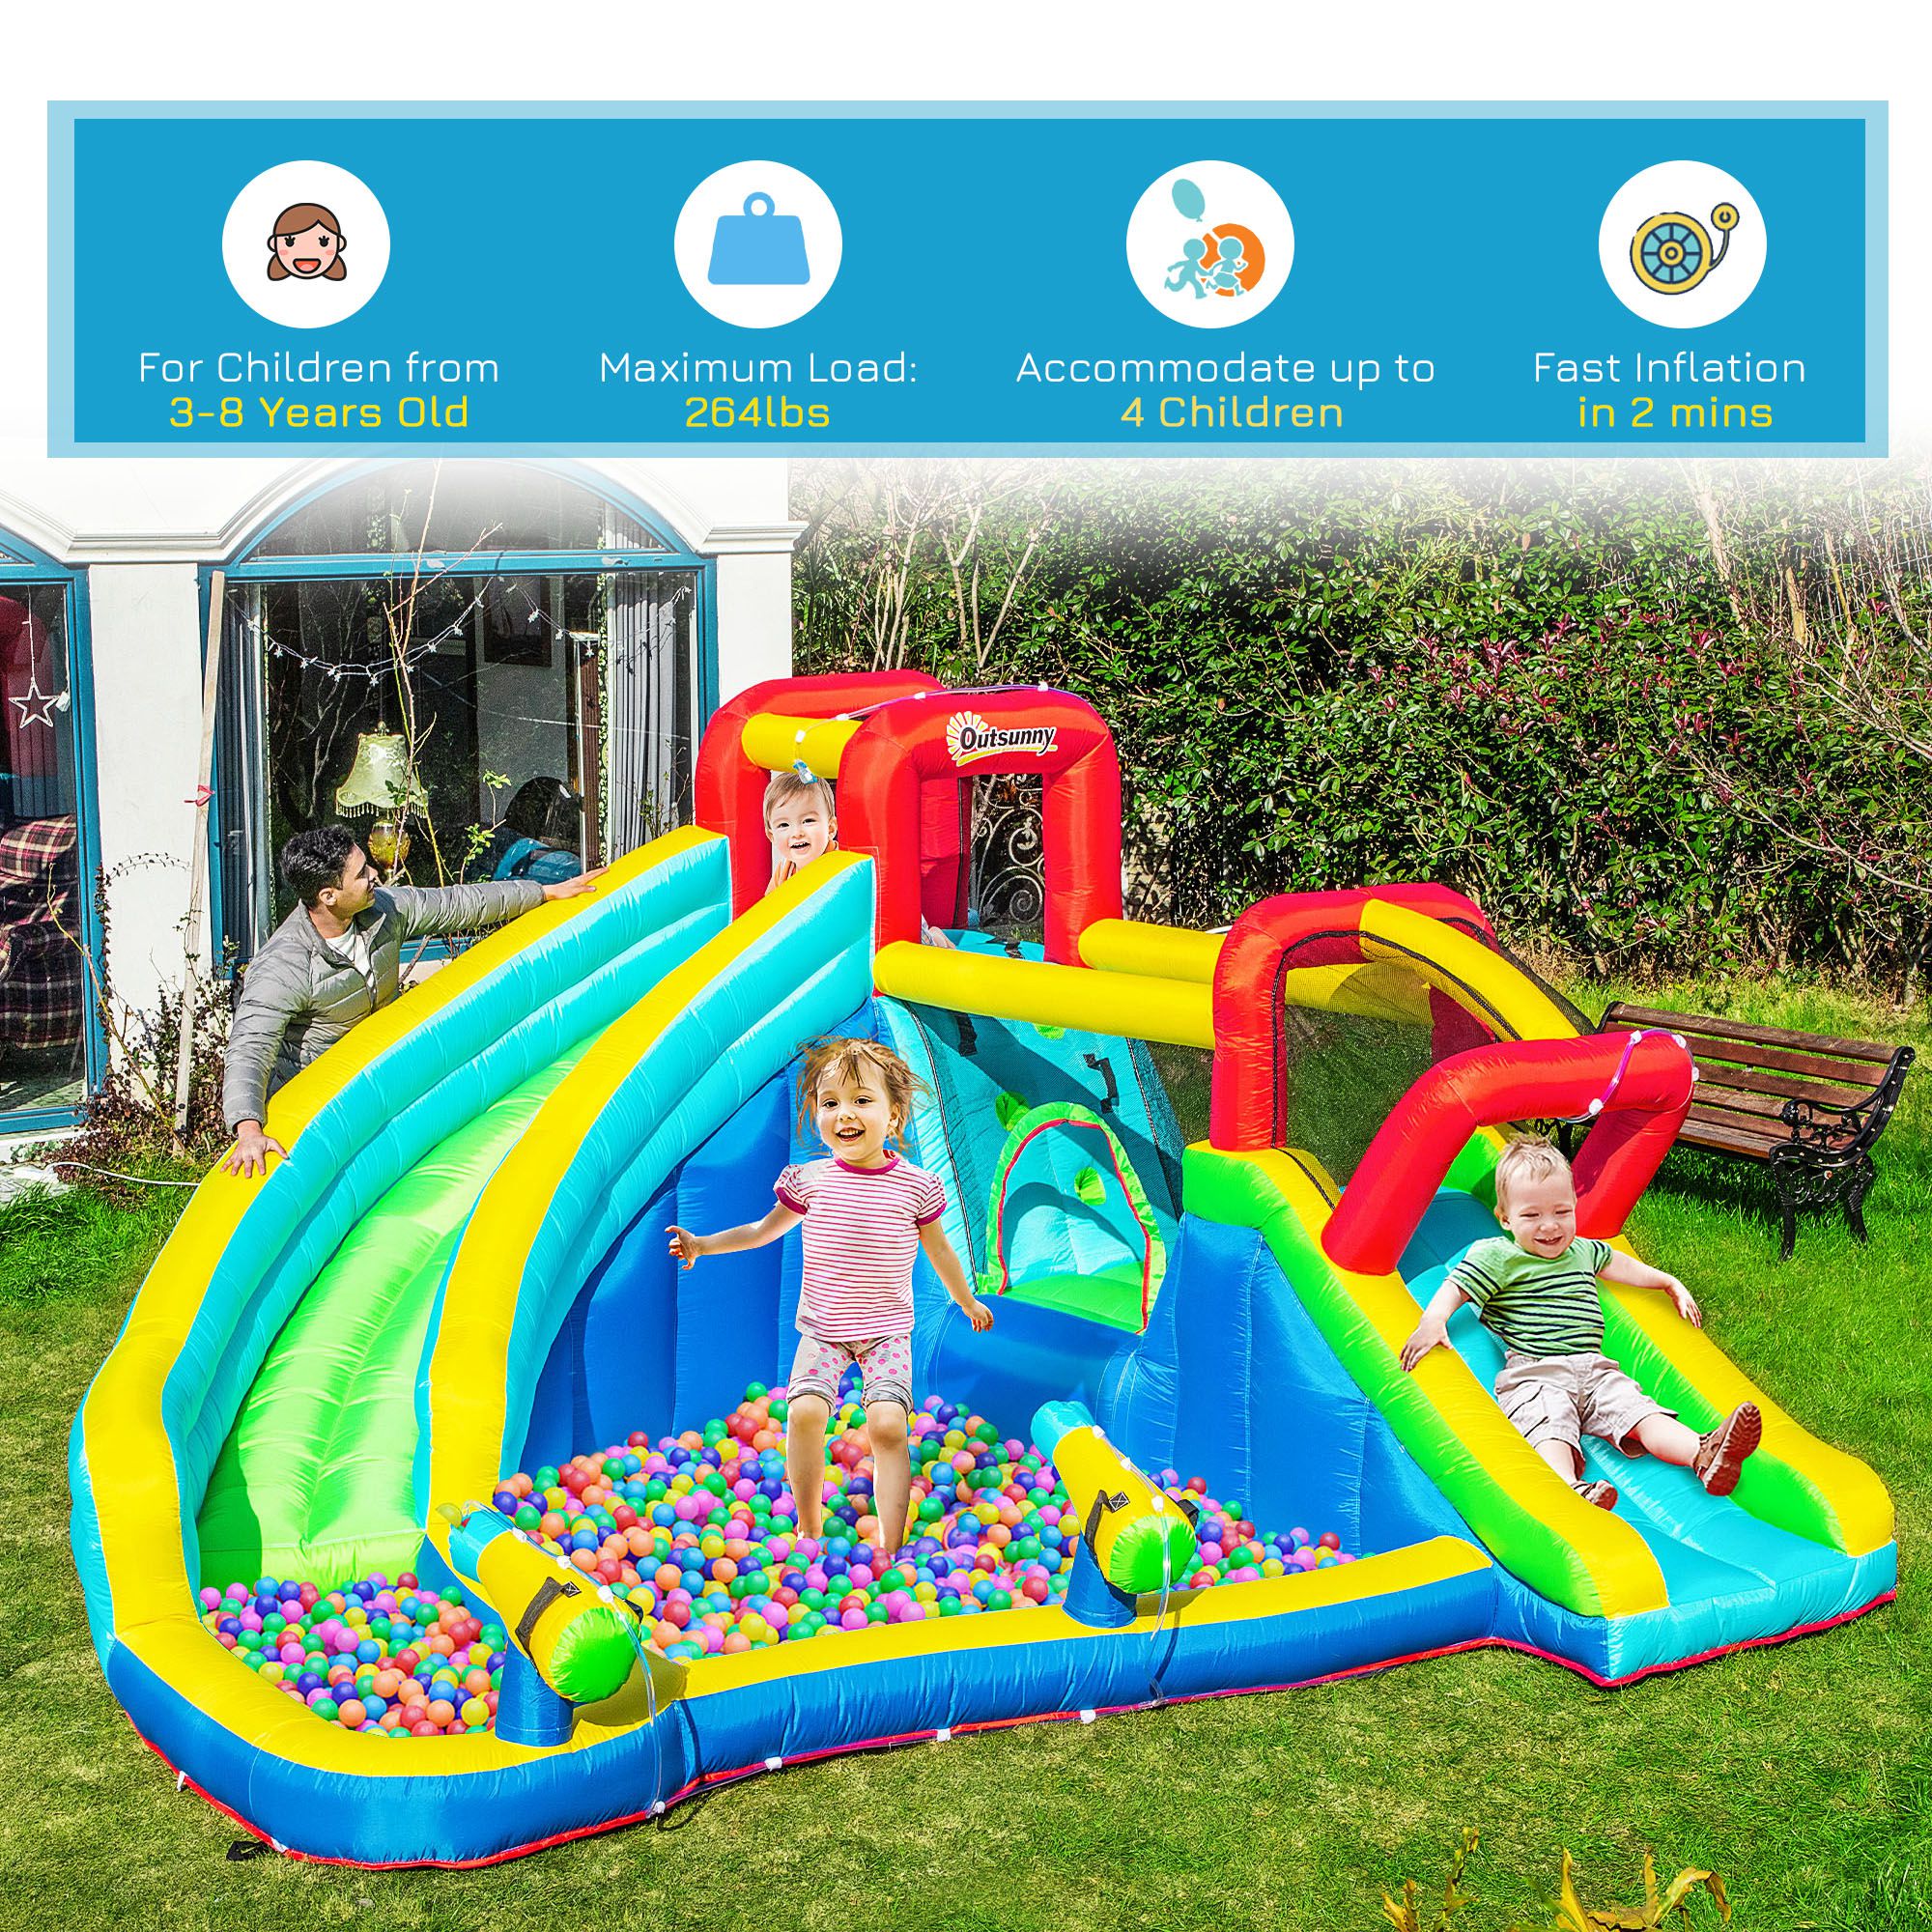 NEW Banzai Super Bounce 'N Slide Bouncer House Play Jump Inflatable Party 